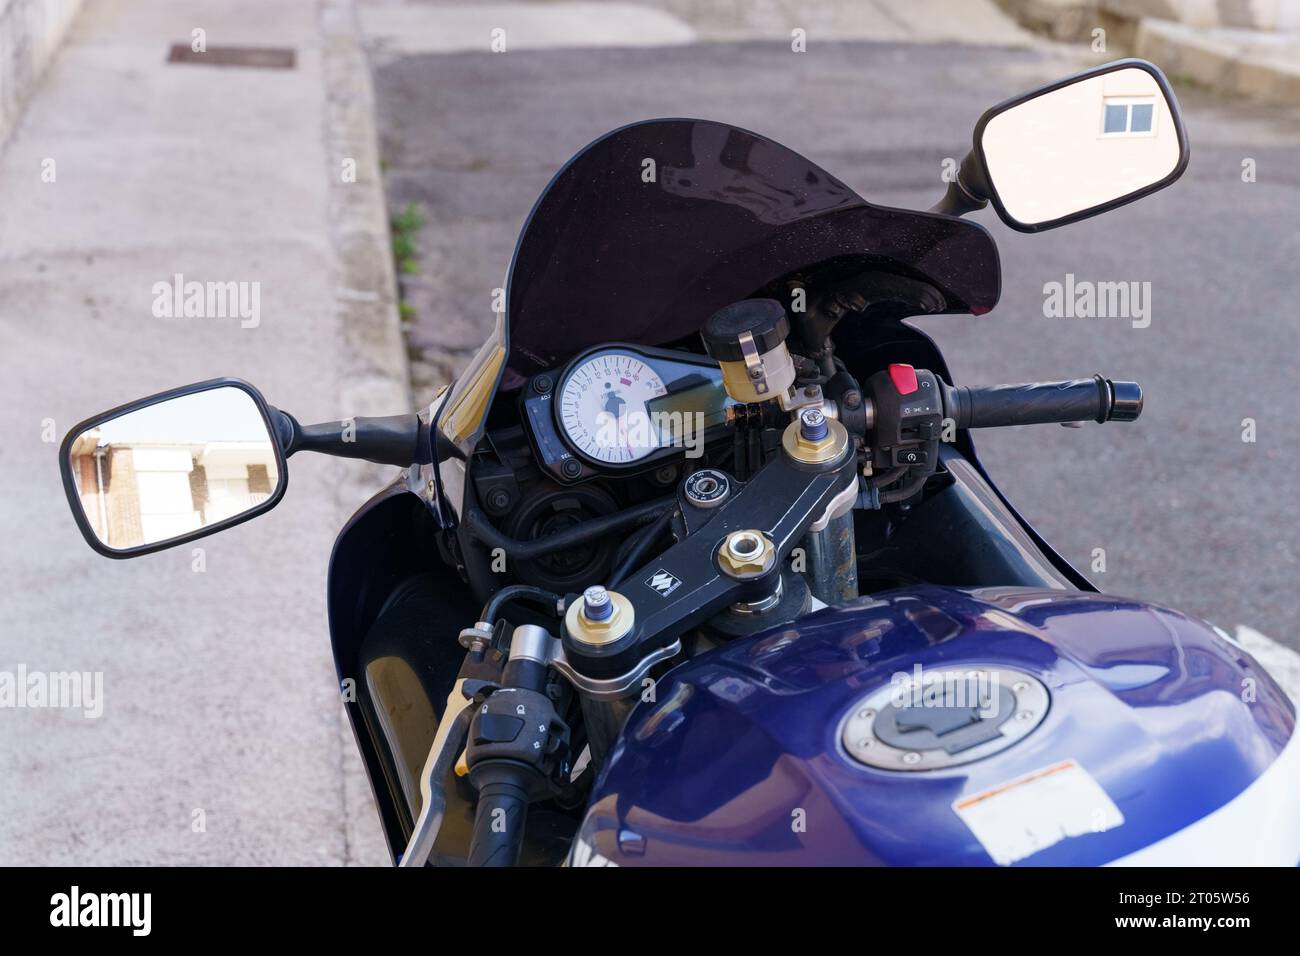 Astorga, Spain - June 4, 2023: Blue Suzuki motorcycle parked in the parking lot. Close-up on the dashboard, mirrors, tank. Stock Photo